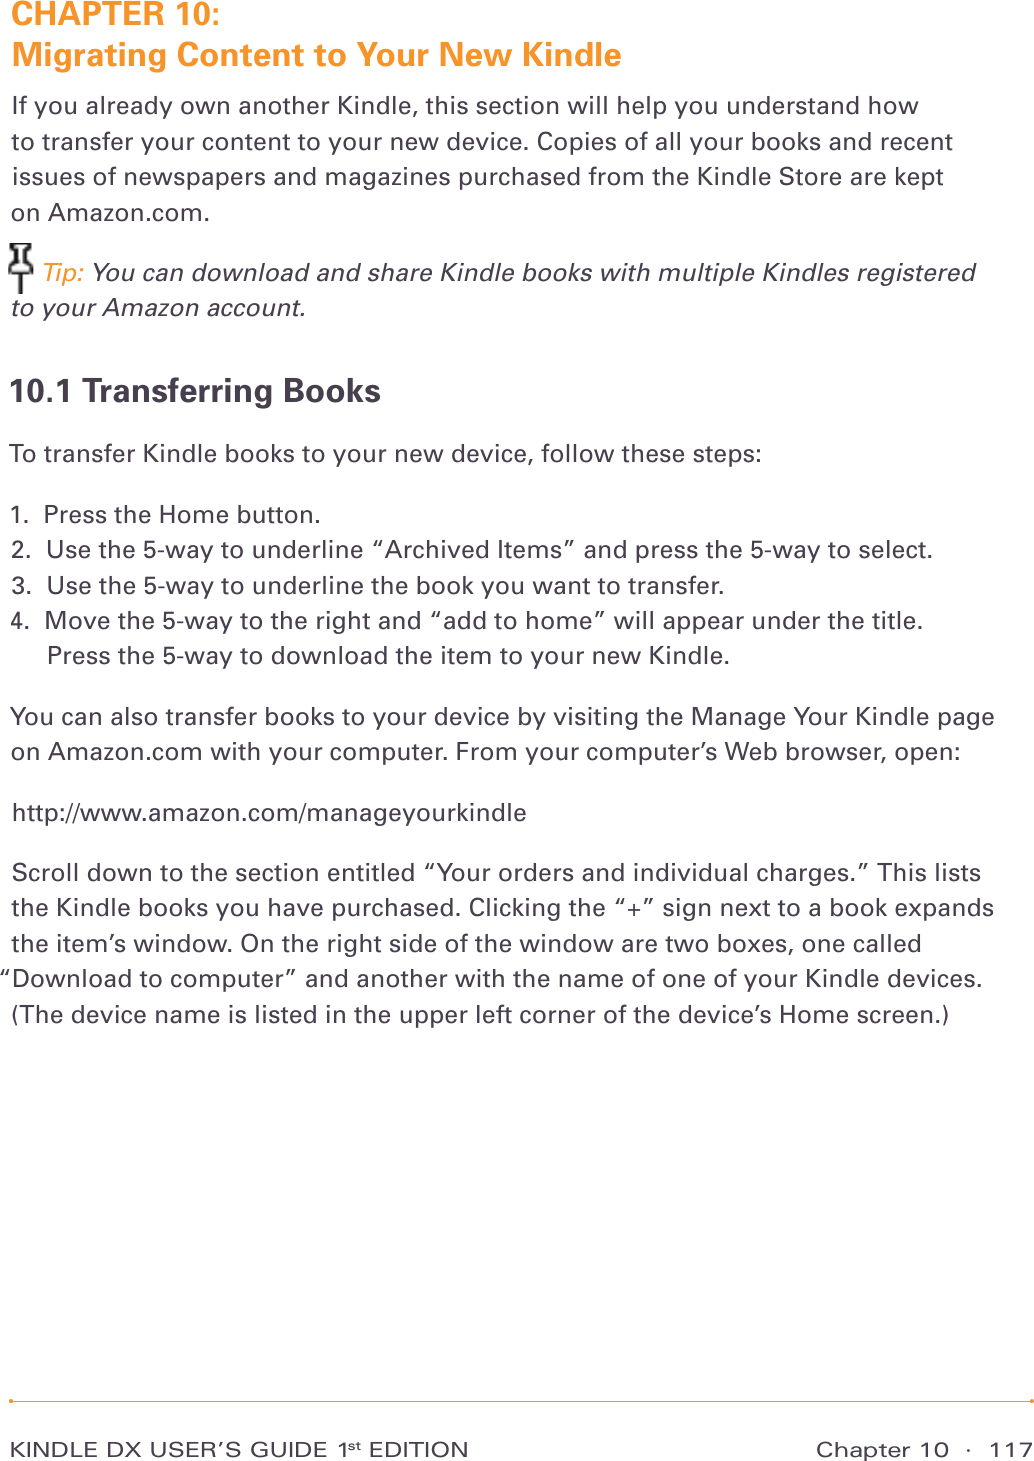 Chapter 10  ·  117KINDLE DX USER’S GUIDE 1st EDITIONCHAPTER 10:  Migrating Content to Your New KindleIf you already own another Kindle, this section will help you understand how  to transfer your content to your new device. Copies of all your books and recent issues of newspapers and magazines purchased from the Kindle Store are kept  on Amazon.com.  Tip: You can download and share Kindle books with multiple Kindles registered to your Amazon account.10.1 Transferring BooksTo transfer Kindle books to your new device, follow these steps:1.   Press the Home button. 2.   Use the 5-way to underline “Archived Items” and press the 5-way to select. 3.   Use the 5-way to underline the book you want to transfer. 4.   Move the 5-way to the right and “add to home” will appear under the title.  Press the 5-way to download the item to your new Kindle. You can also transfer books to your device by visiting the Manage Your Kindle page  on Amazon.com with your computer. From your computer’s Web browser, open: http://www.amazon.com/manageyourkindleScroll down to the section entitled “Your orders and individual charges.” This lists  the Kindle books you have purchased. Clicking the “+” sign next to a book expands the item’s window. On the right side of the window are two boxes, one called “Download to computer” and another with the name of one of your Kindle devices. (The device name is listed in the upper left corner of the device’s Home screen.)